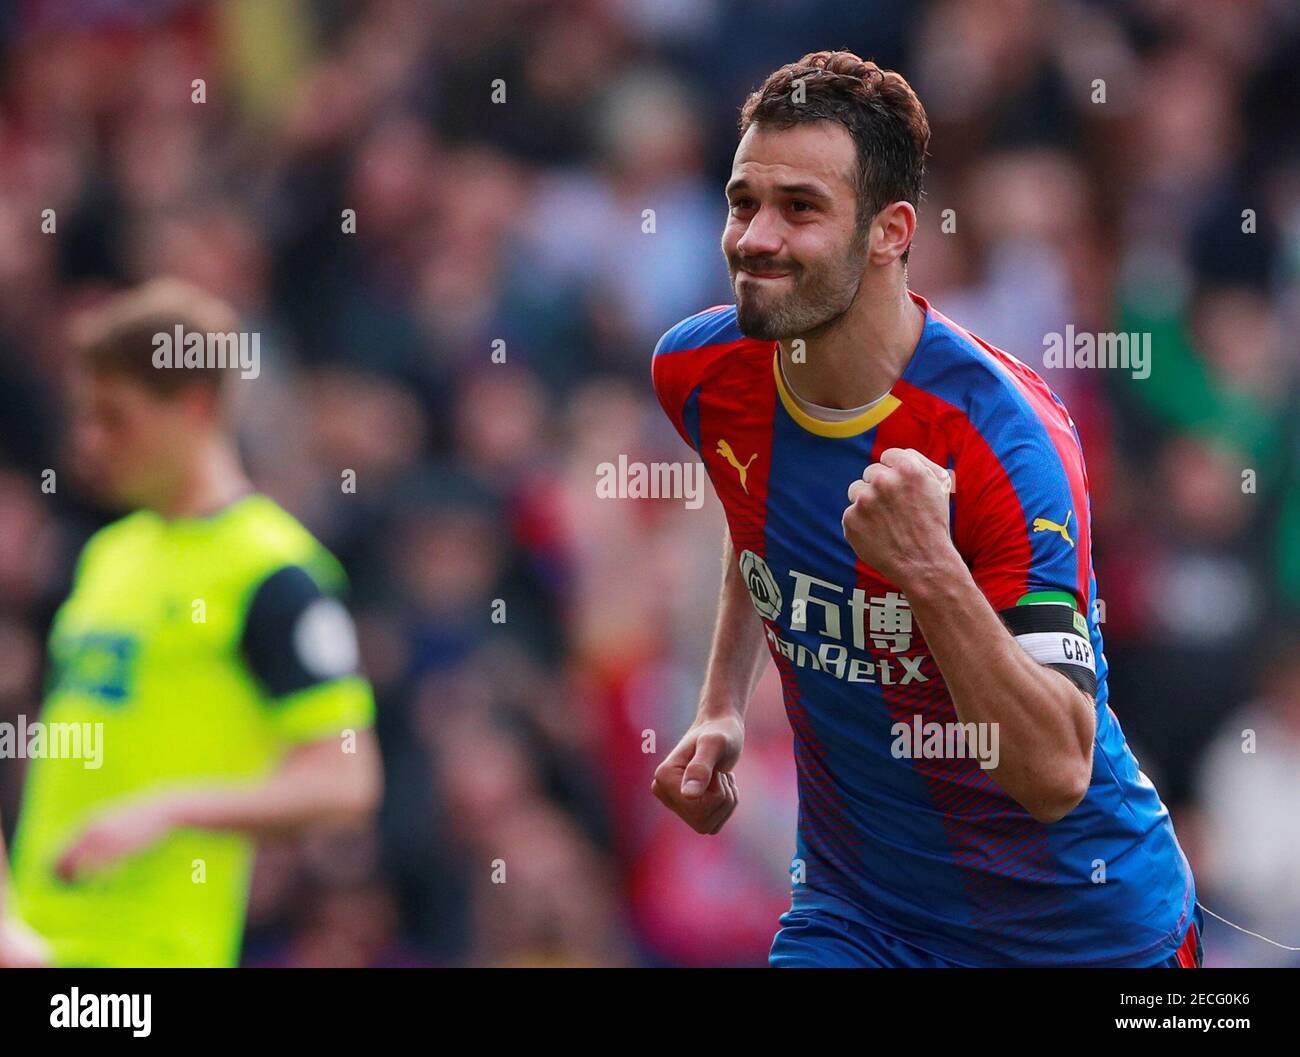 Soccer Football - Premier League - Crystal Palace v Huddersfield Town - Selhurst Park, London, Britain - March 30, 2019  Crystal Palace's Luka Milivojevic celebrates scoring their first goal    Action Images via Reuters/Andrew Couldridge  EDITORIAL USE ONLY. No use with unauthorized audio, video, data, fixture lists, club/league logos or 'live' services. Online in-match use limited to 75 images, no video emulation. No use in betting, games or single club/league/player publications.  Please contact your account representative for further details. Stock Photo